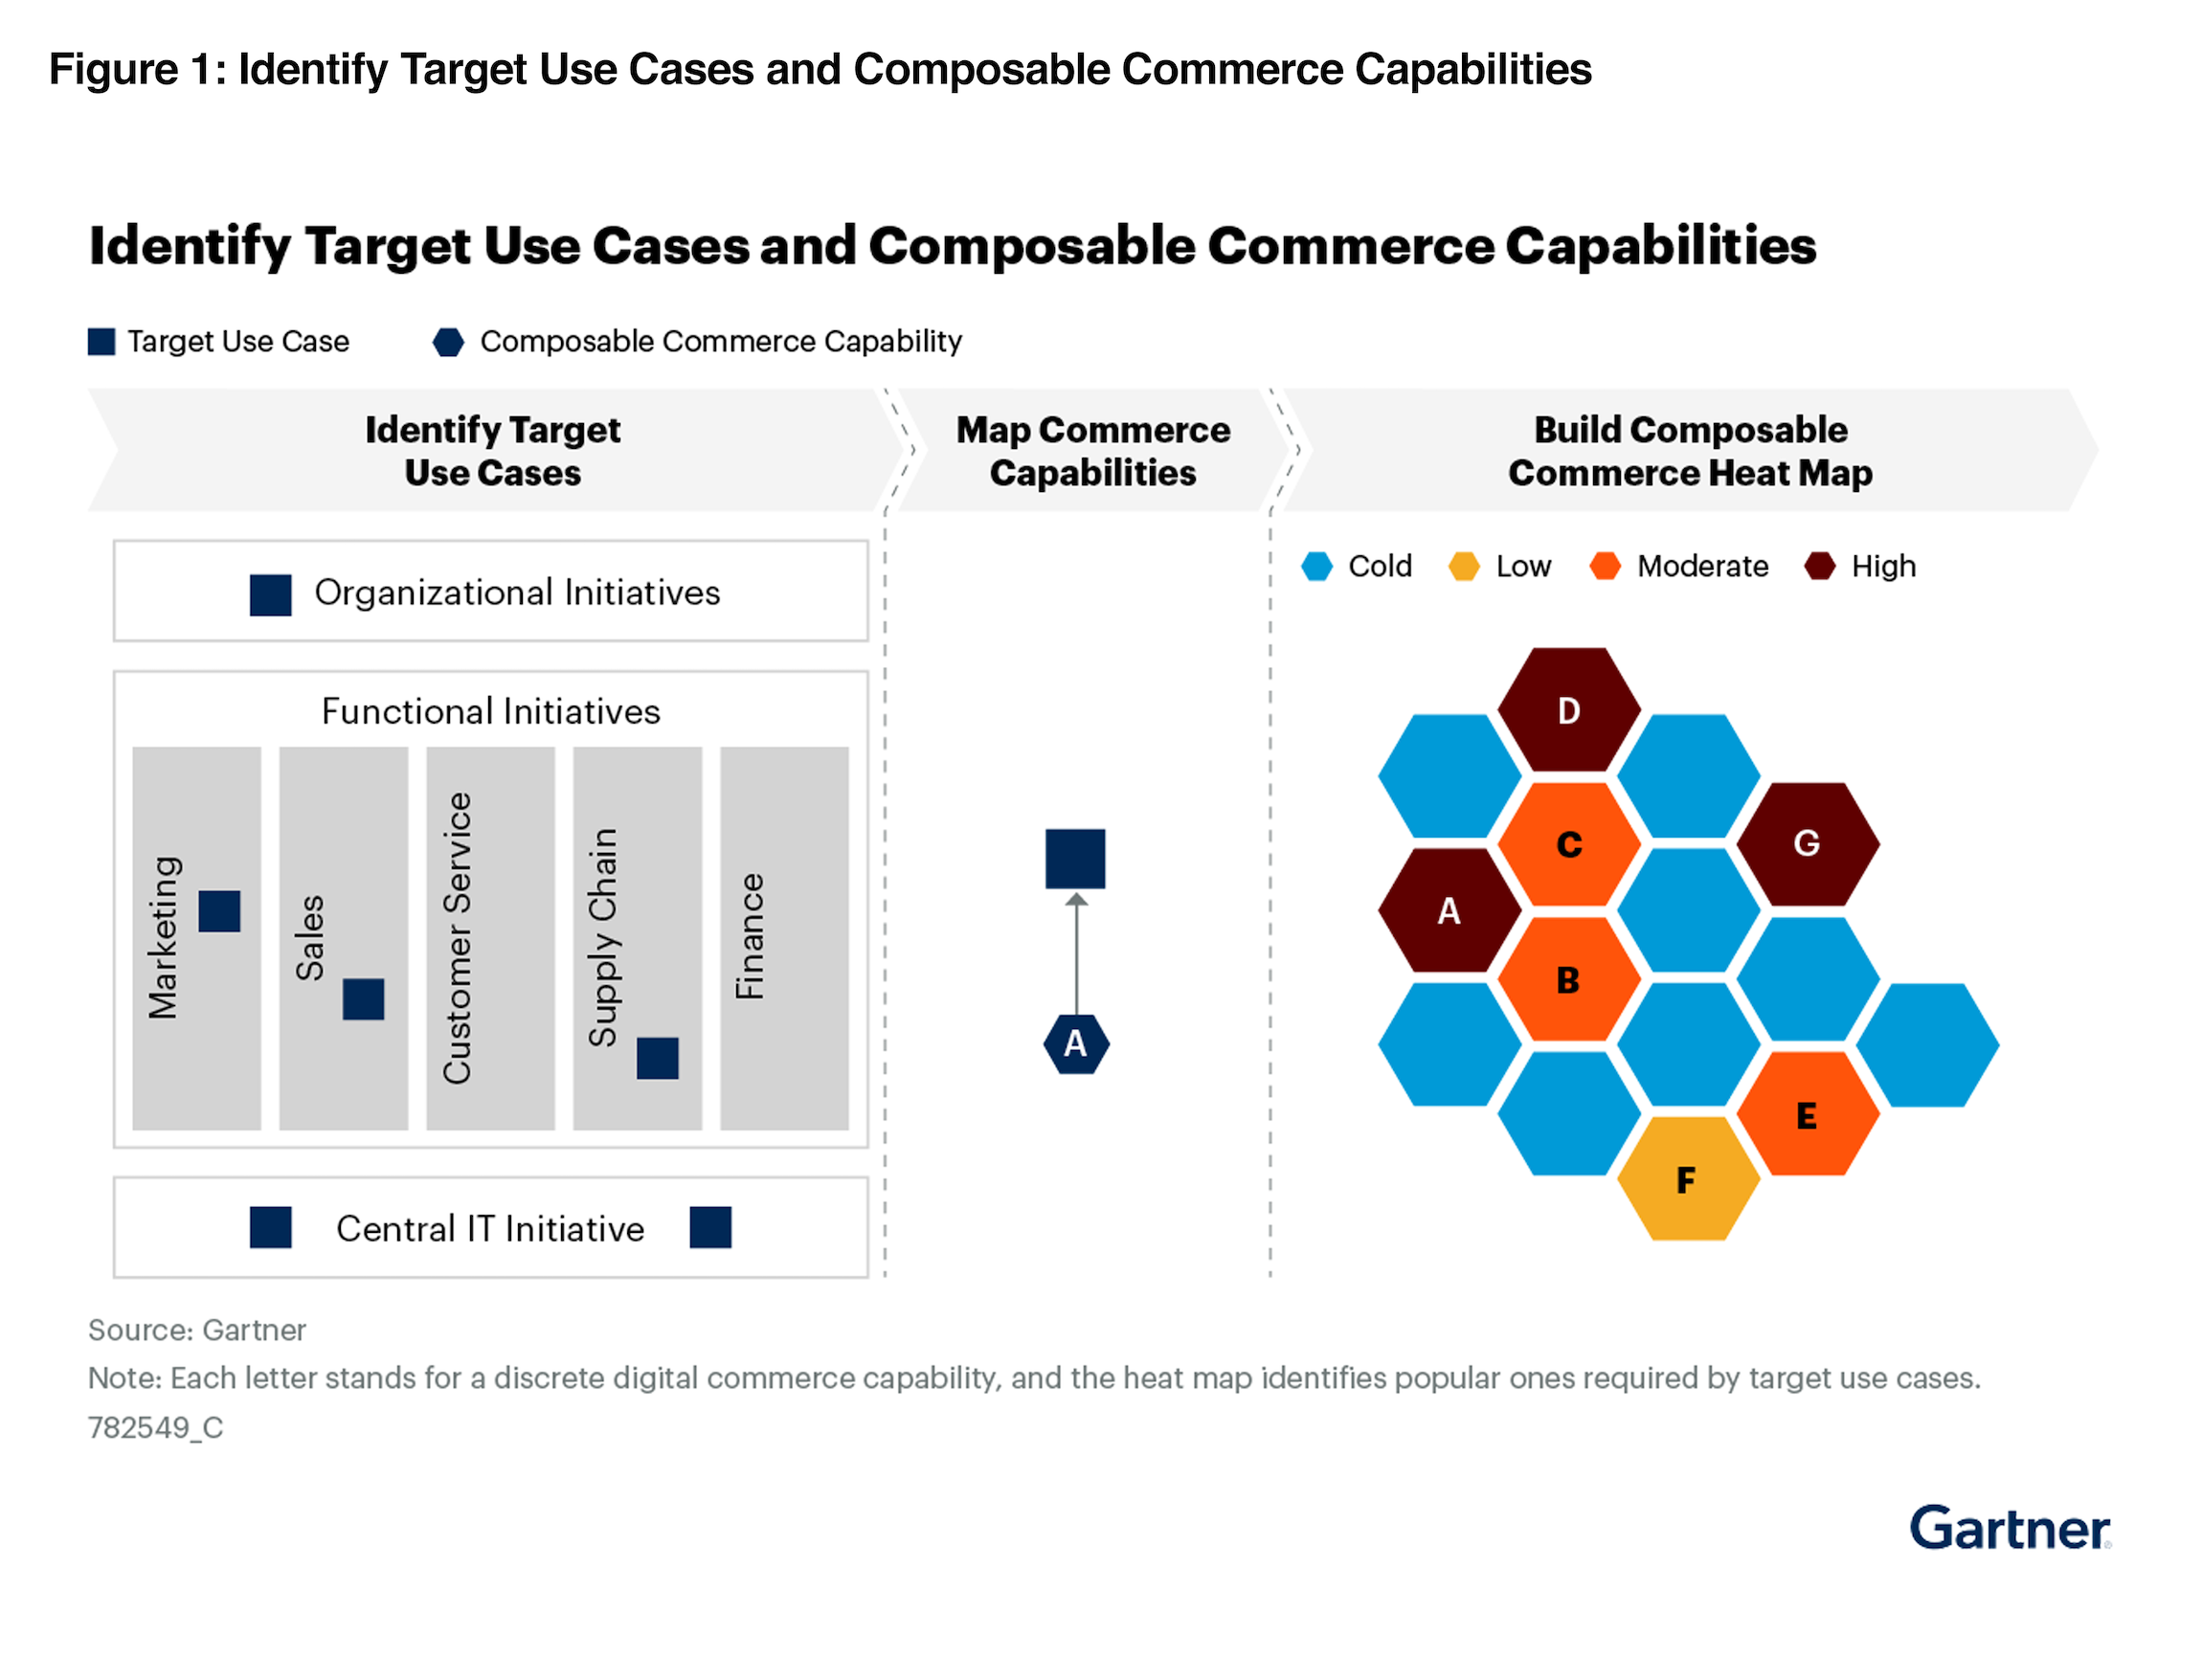 Identify target use cases and composable commerce capabilities